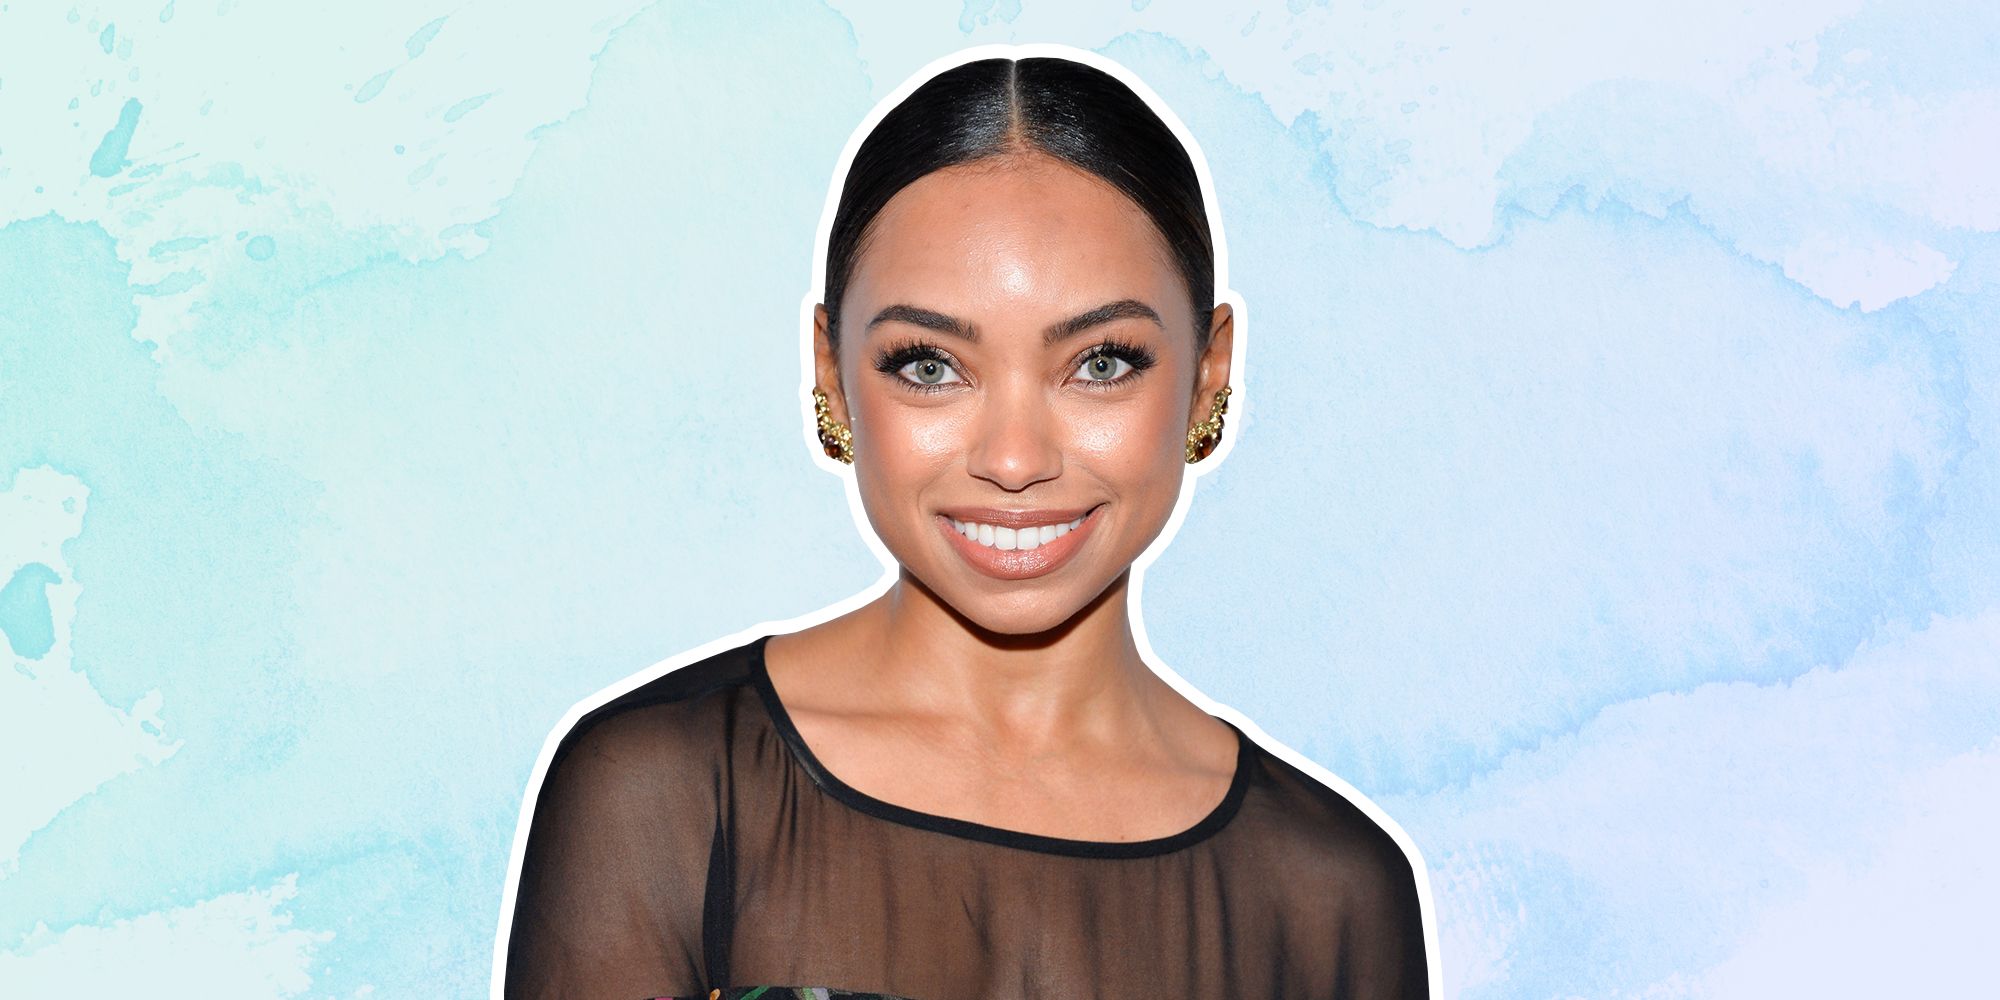 Pictures of logan browning